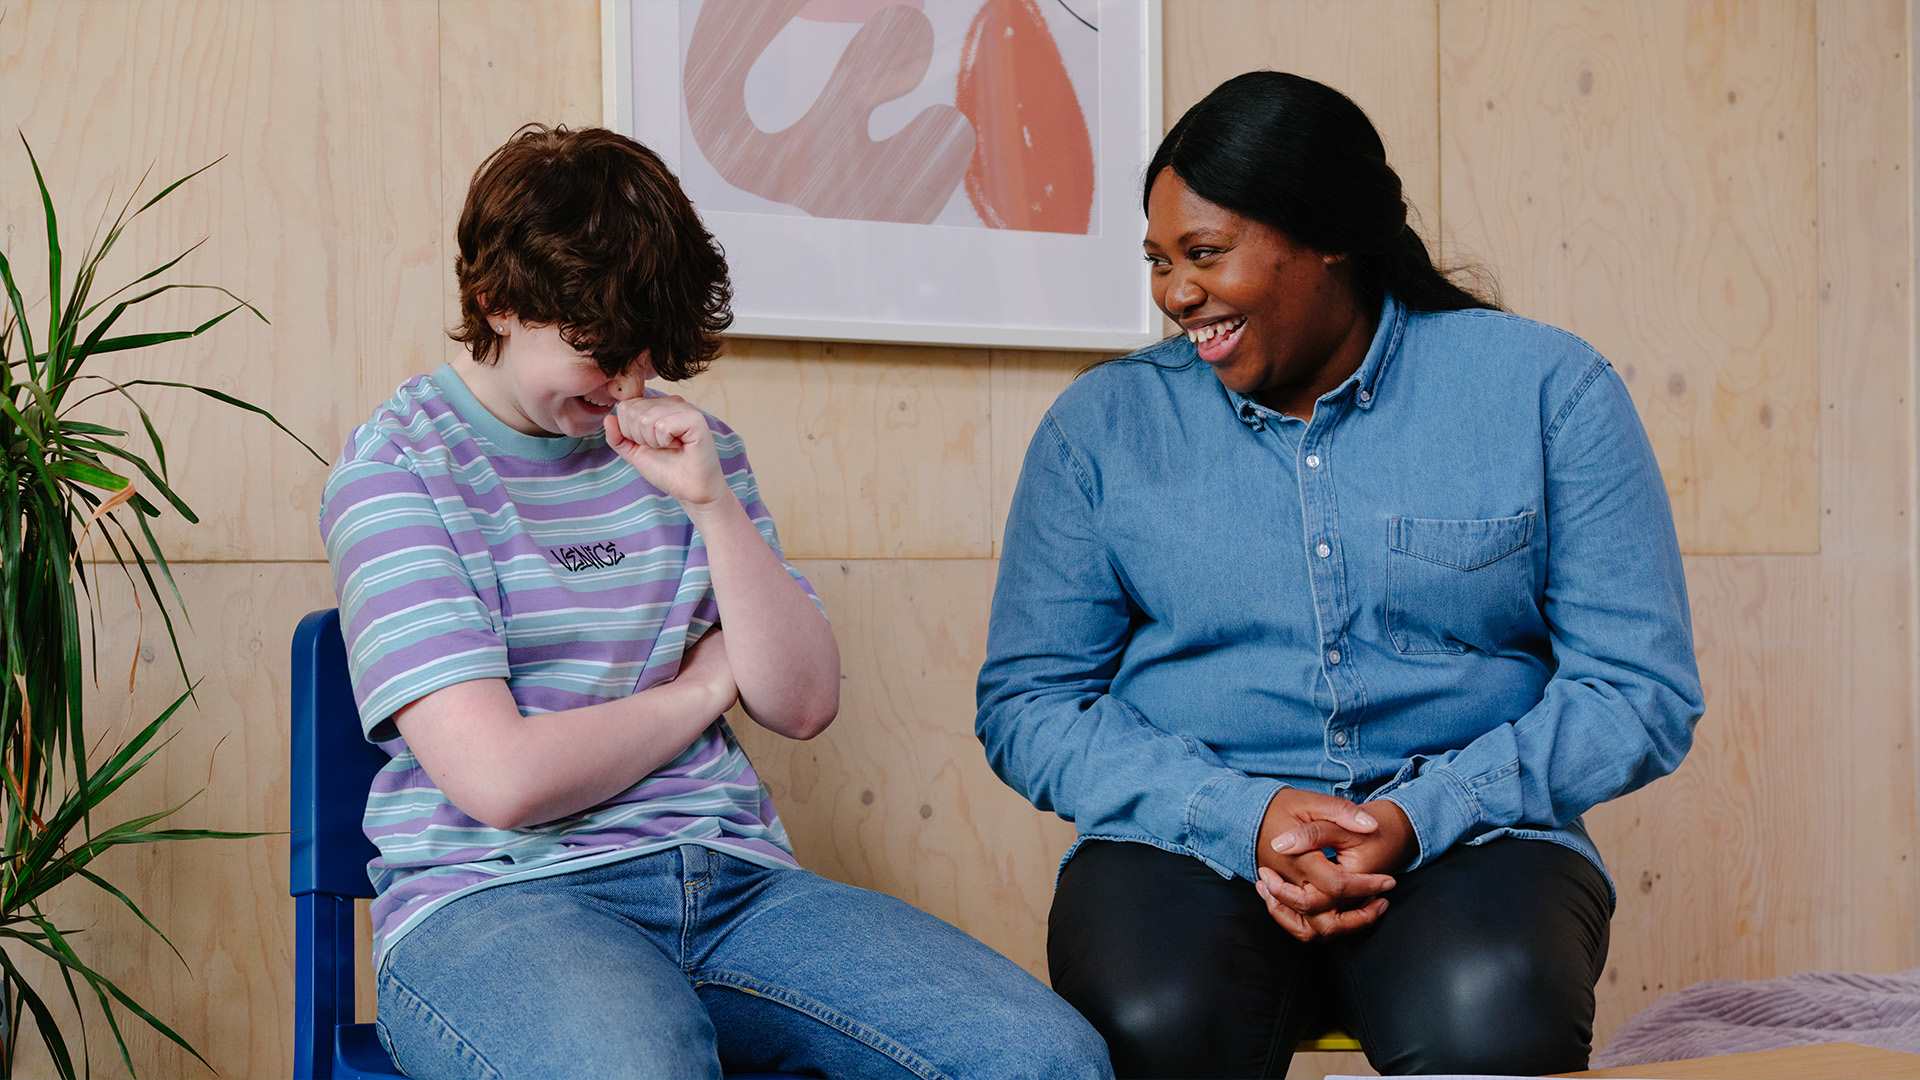 A white non-binary teenager laughing with an older Black woman in a professional setting.